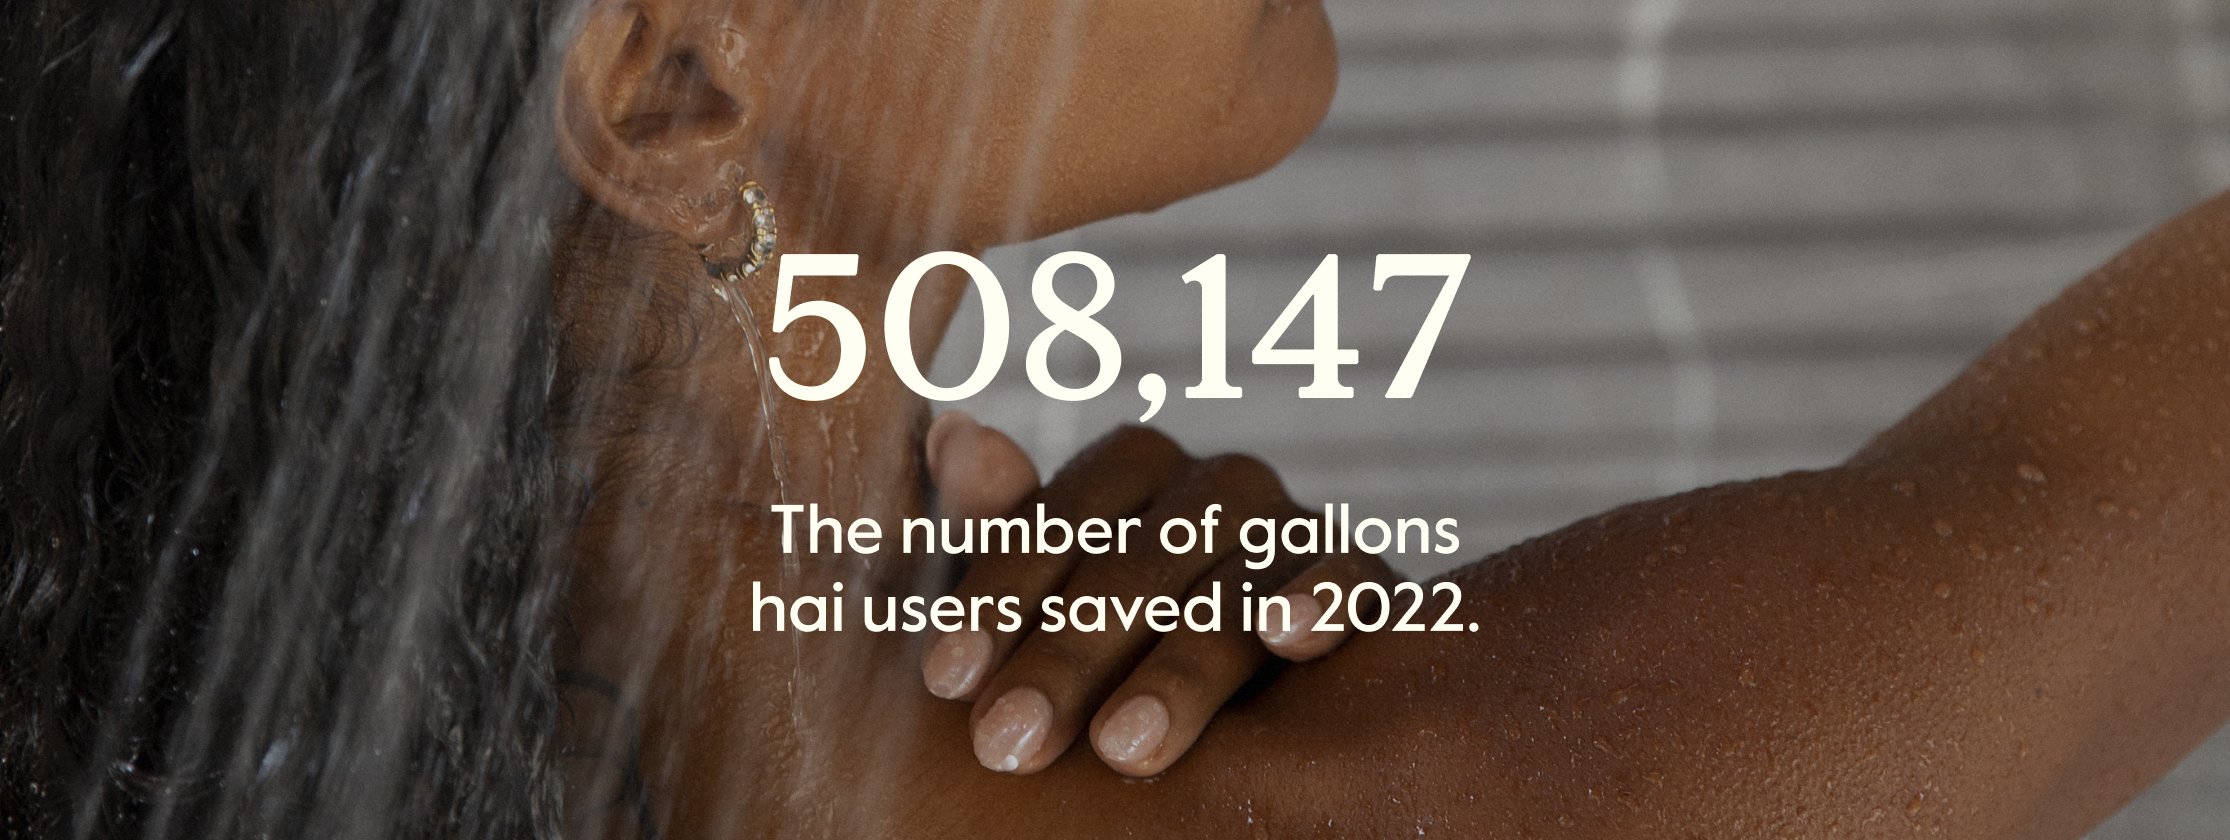 508 147 gallons of water saved with hai water saving shower head